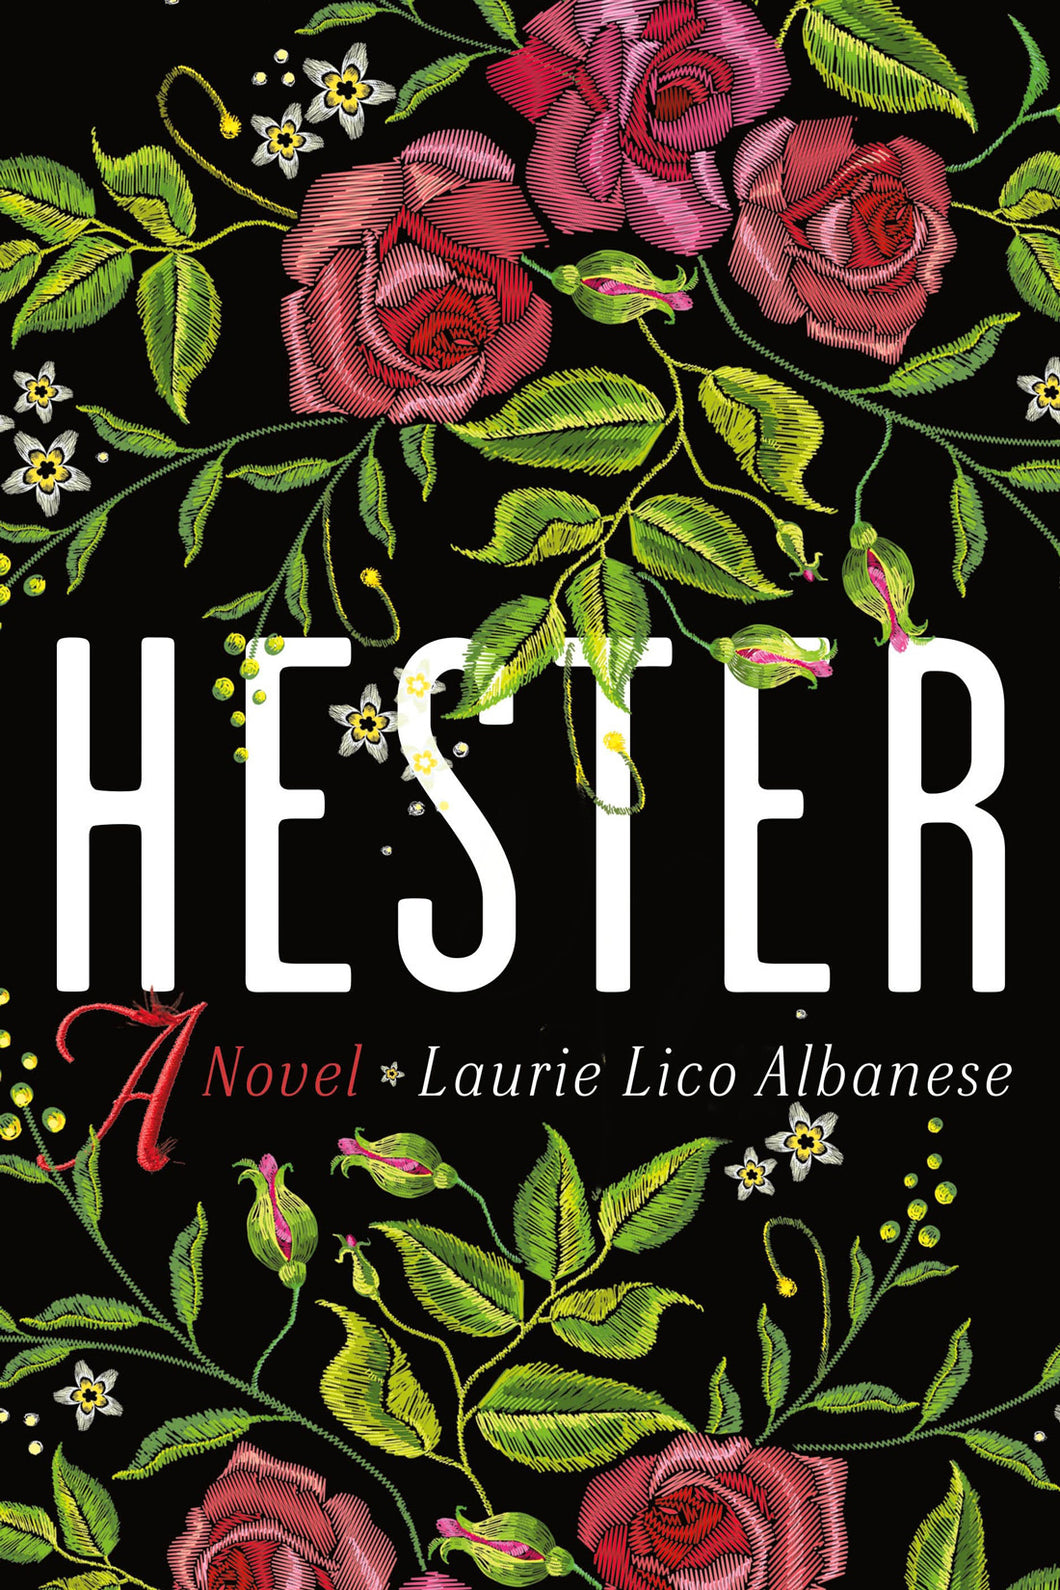 Hester by Laurie Lico Albanese / BOOK OR BUNDLE - Starting at $28!